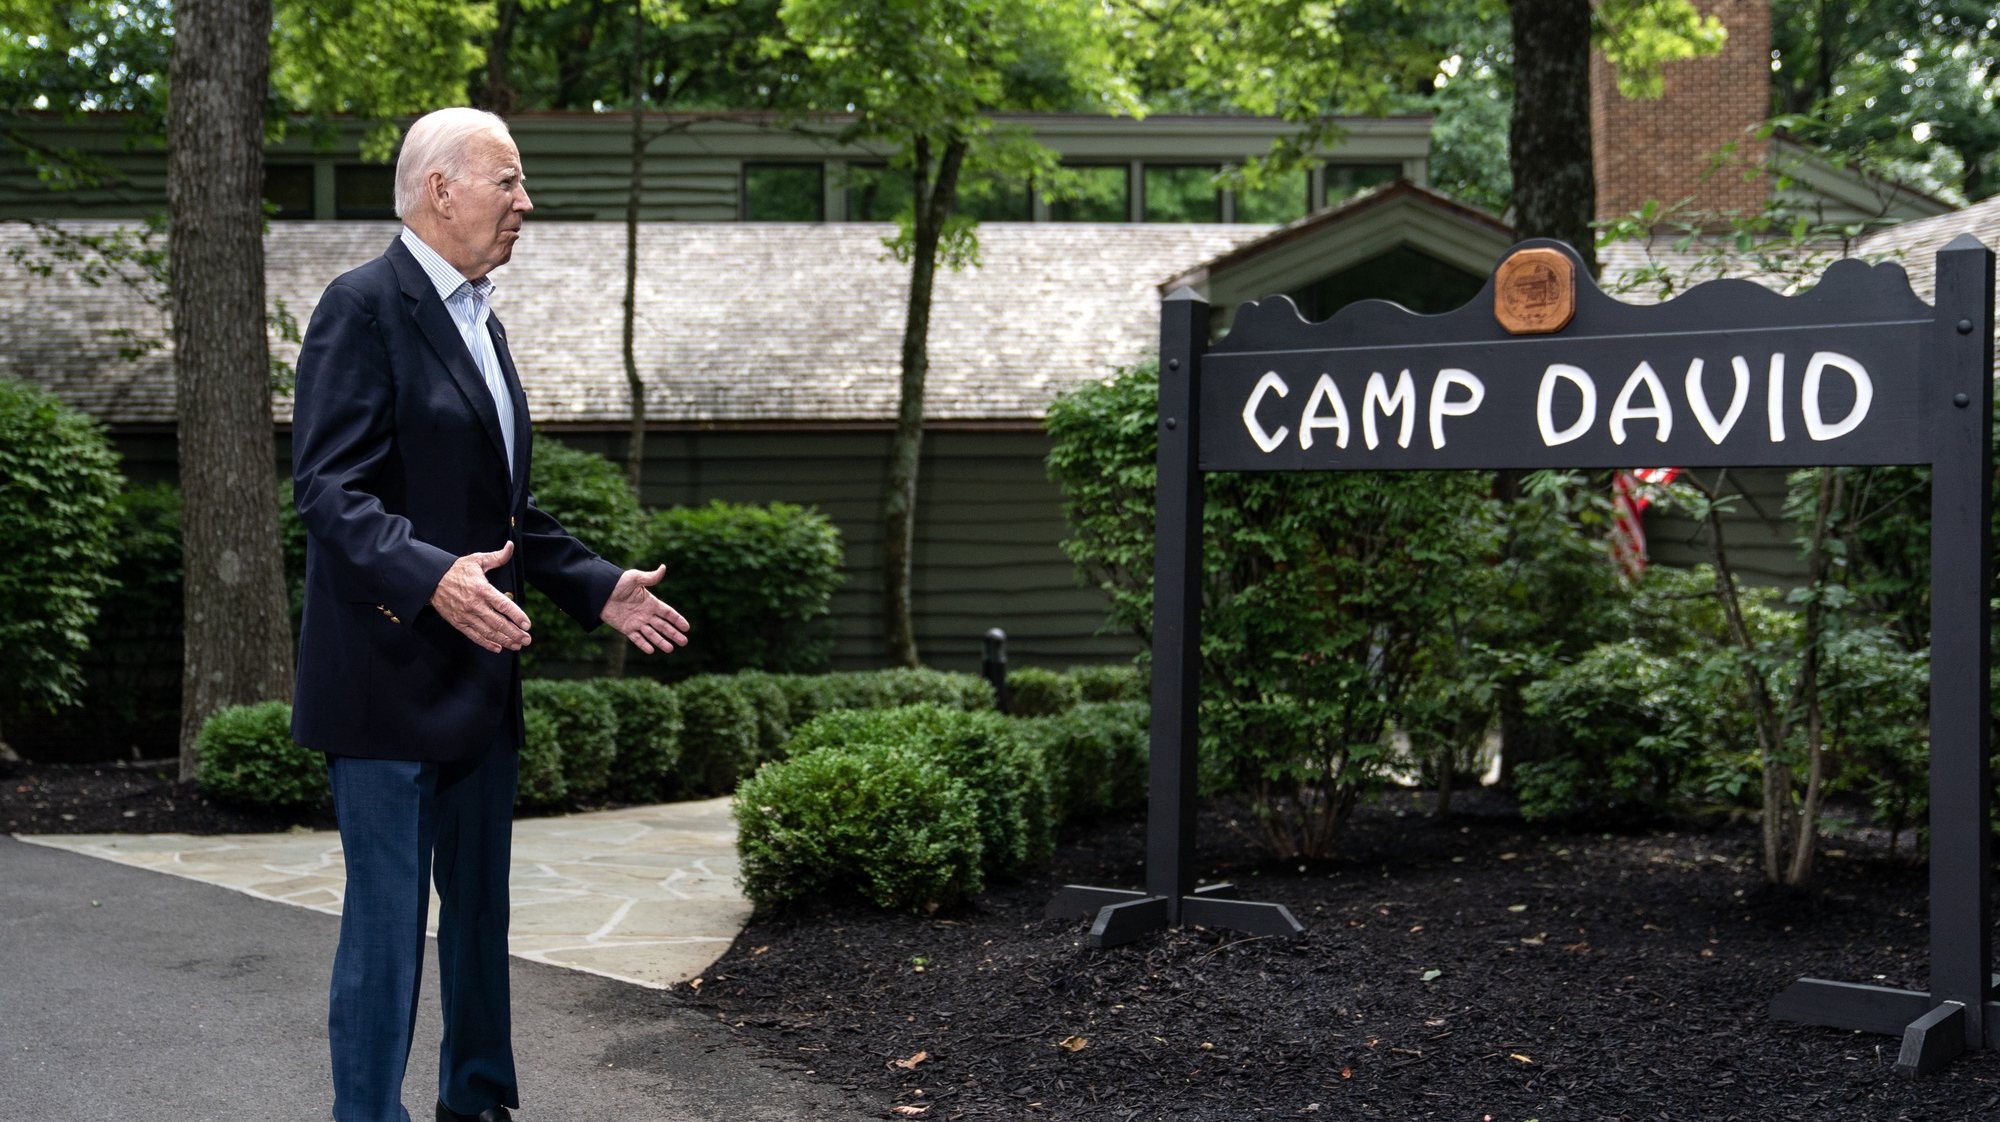 epa10805869 US President Joe Biden gestures as he stands beside the Camp David sign during a trilateral summit at Camp David in Frederick County, Maryland, USA, 18 August 2023. US President Biden is hosting a trilateral summit with South Korean President Yoon Suk Yeol and Japanese Prime Minister Fumio Kishida at the Camp David presidential retreat.  EPA/NATHAN HOWARD / POOL